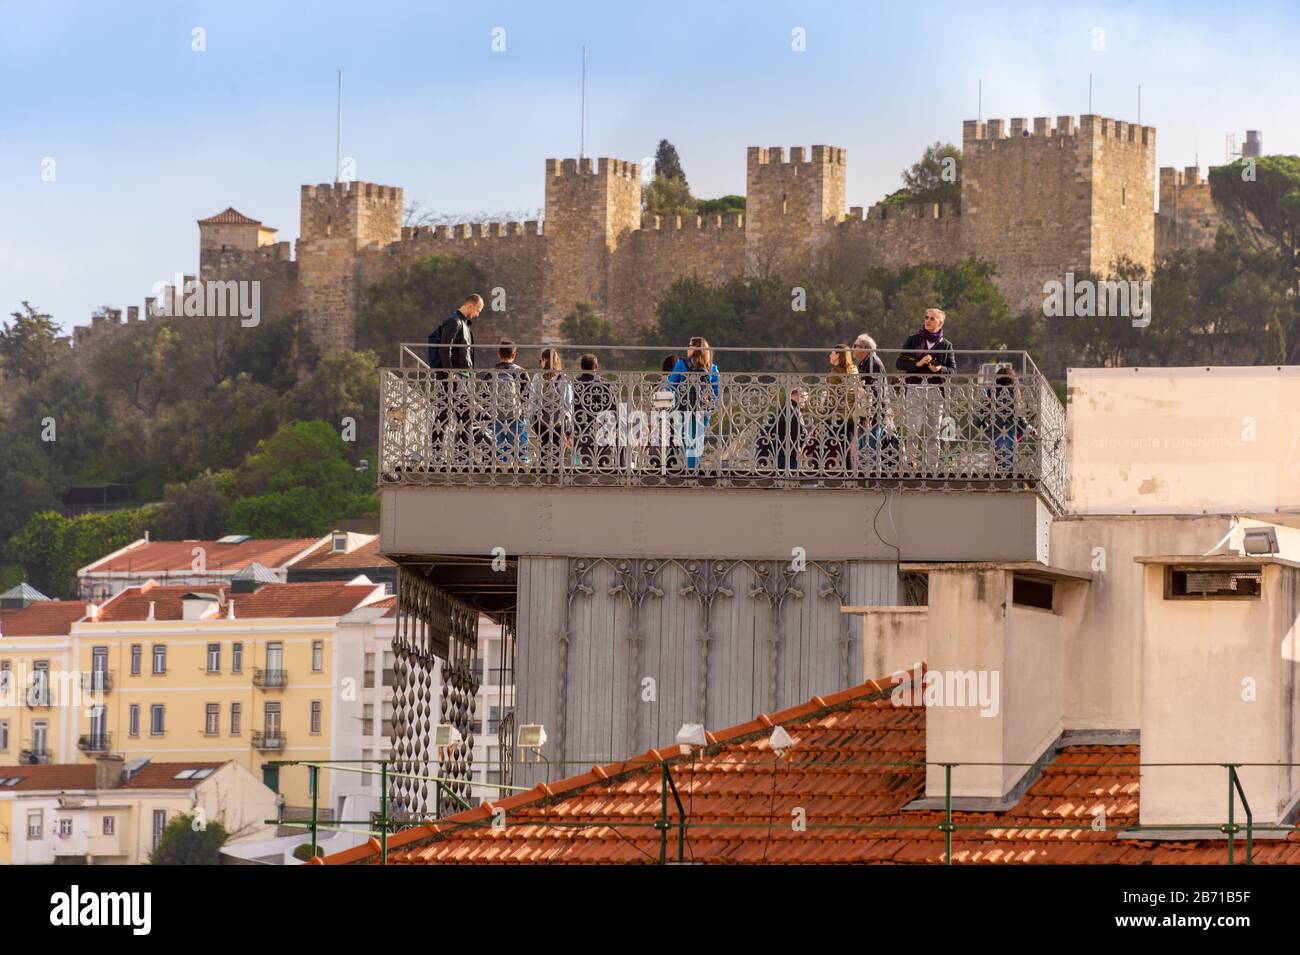 Lisbon, Portugal - 2 March 2020: Tourists lokking at the view from Elevador de Santa Justa. Lisbon Sao Jorge castle in the background. Stock Photo